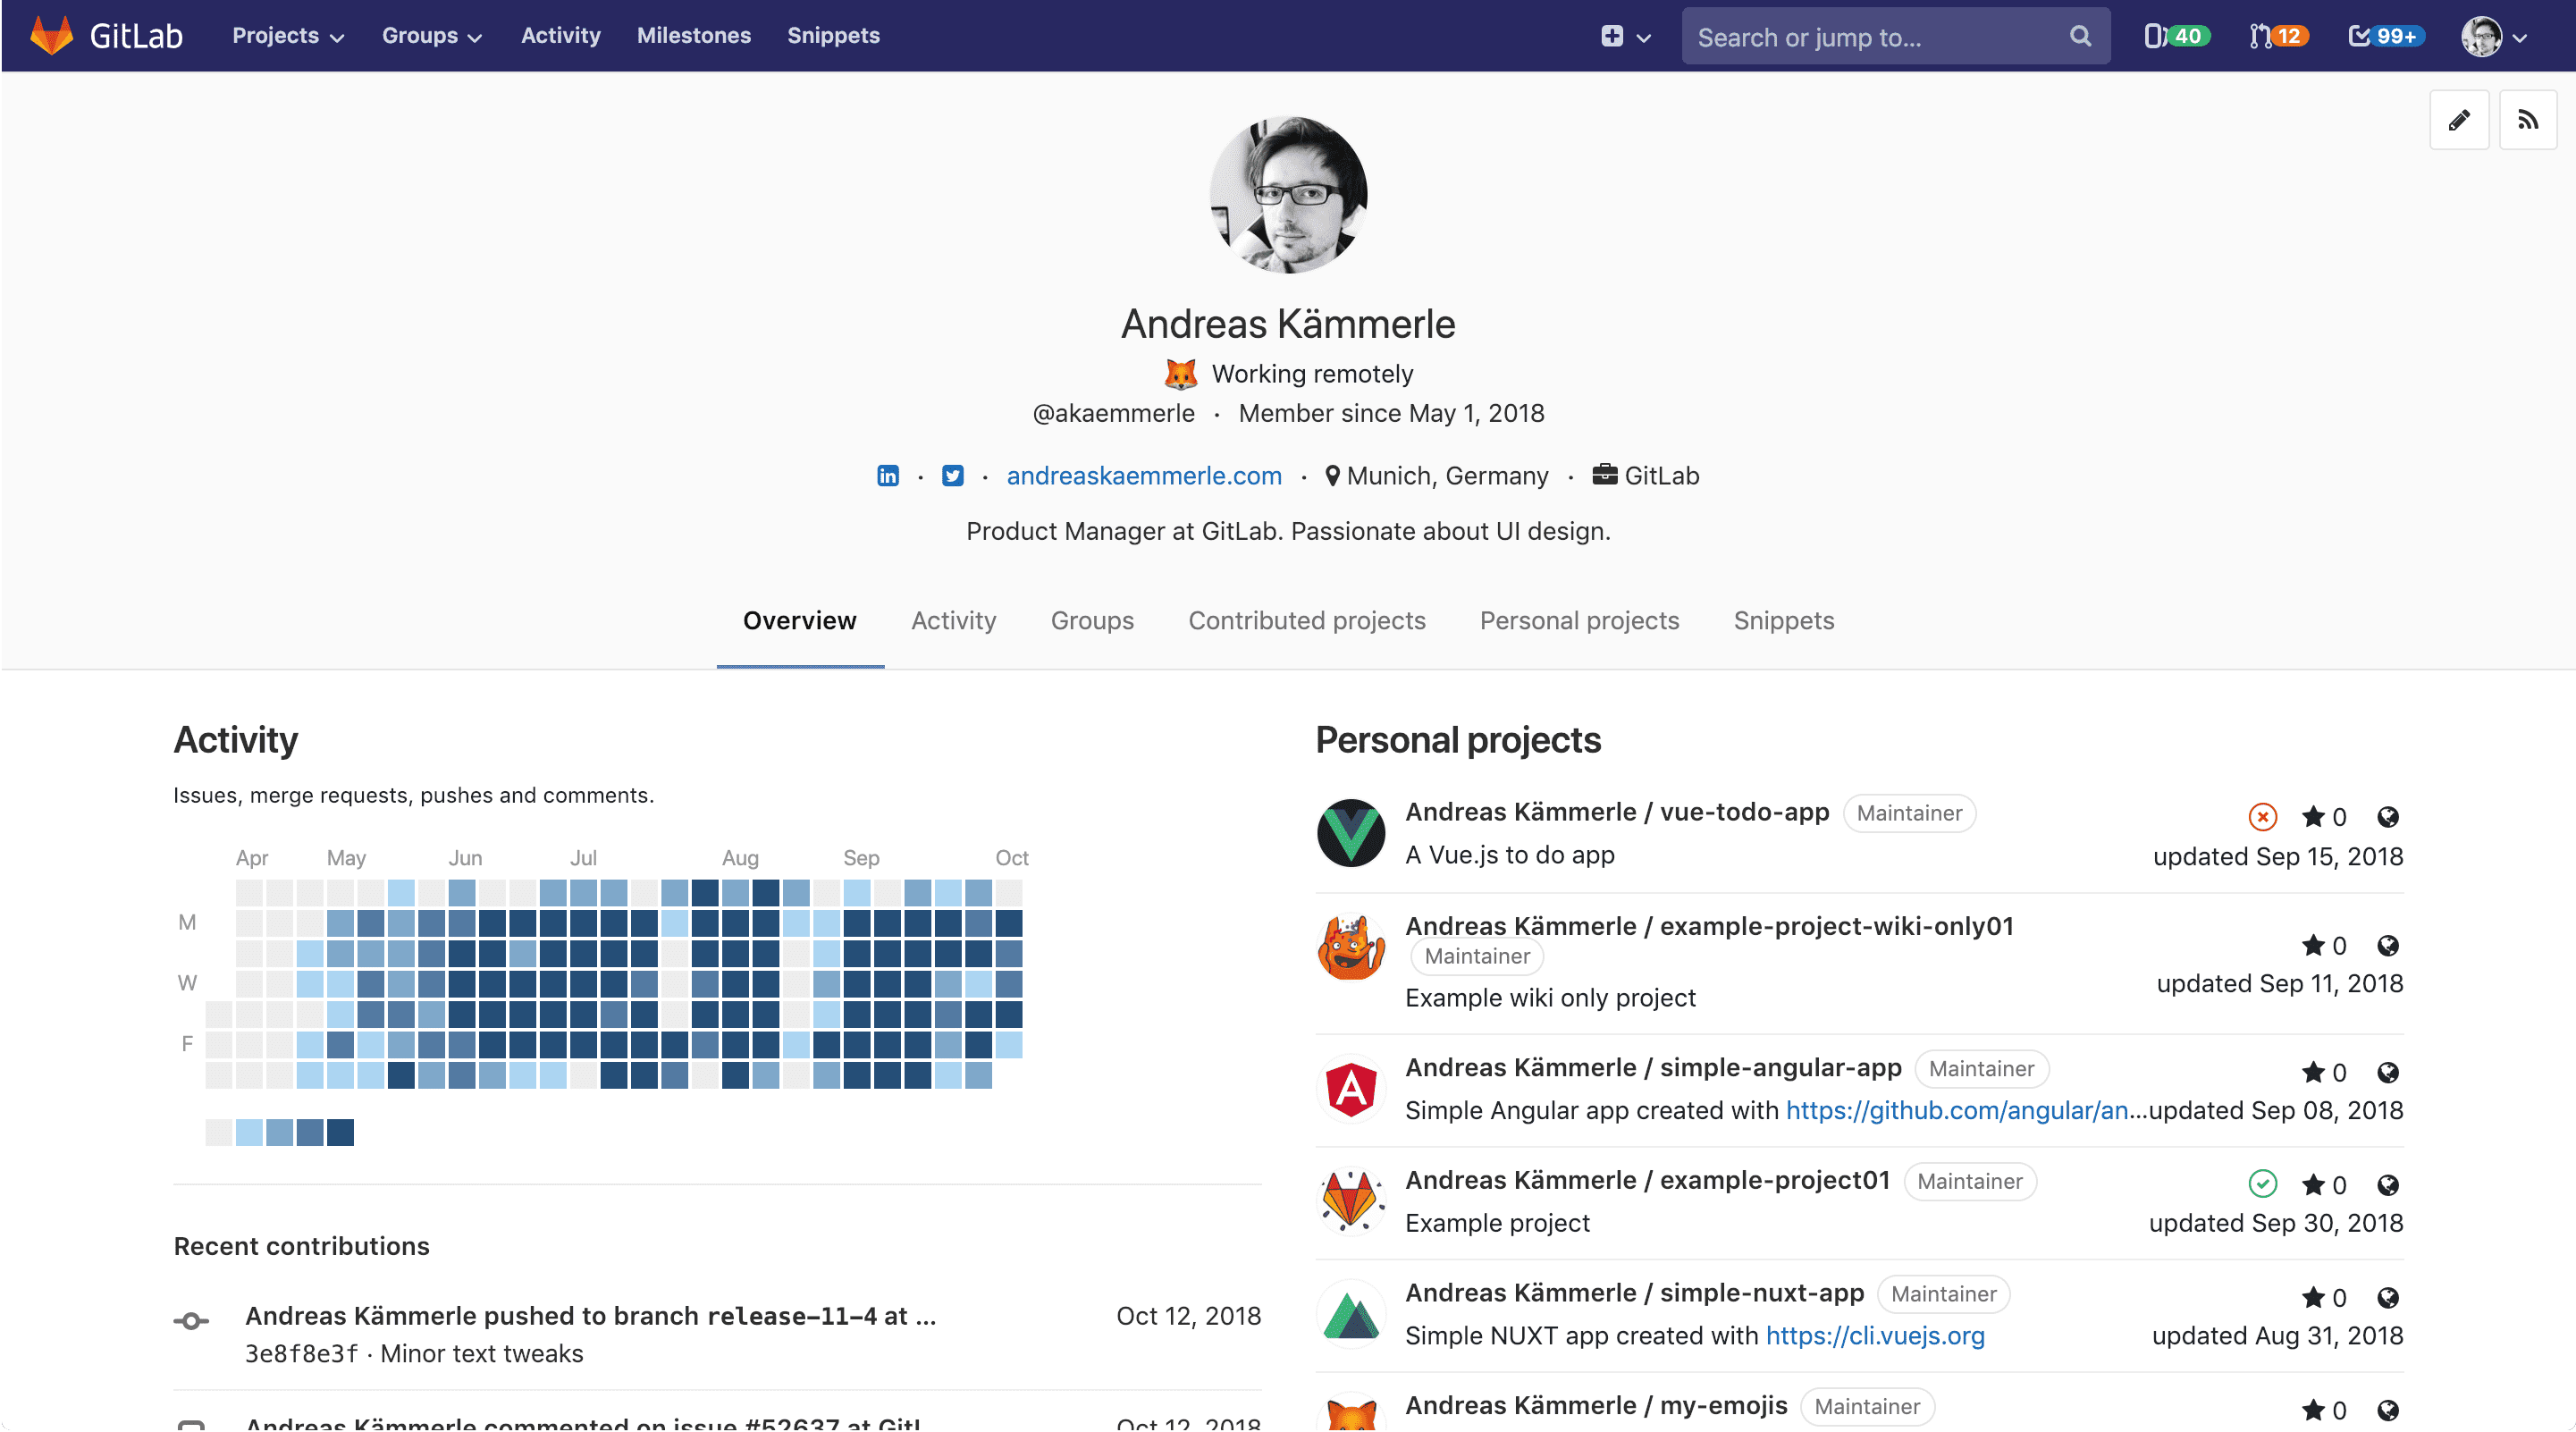 New user profile page overview